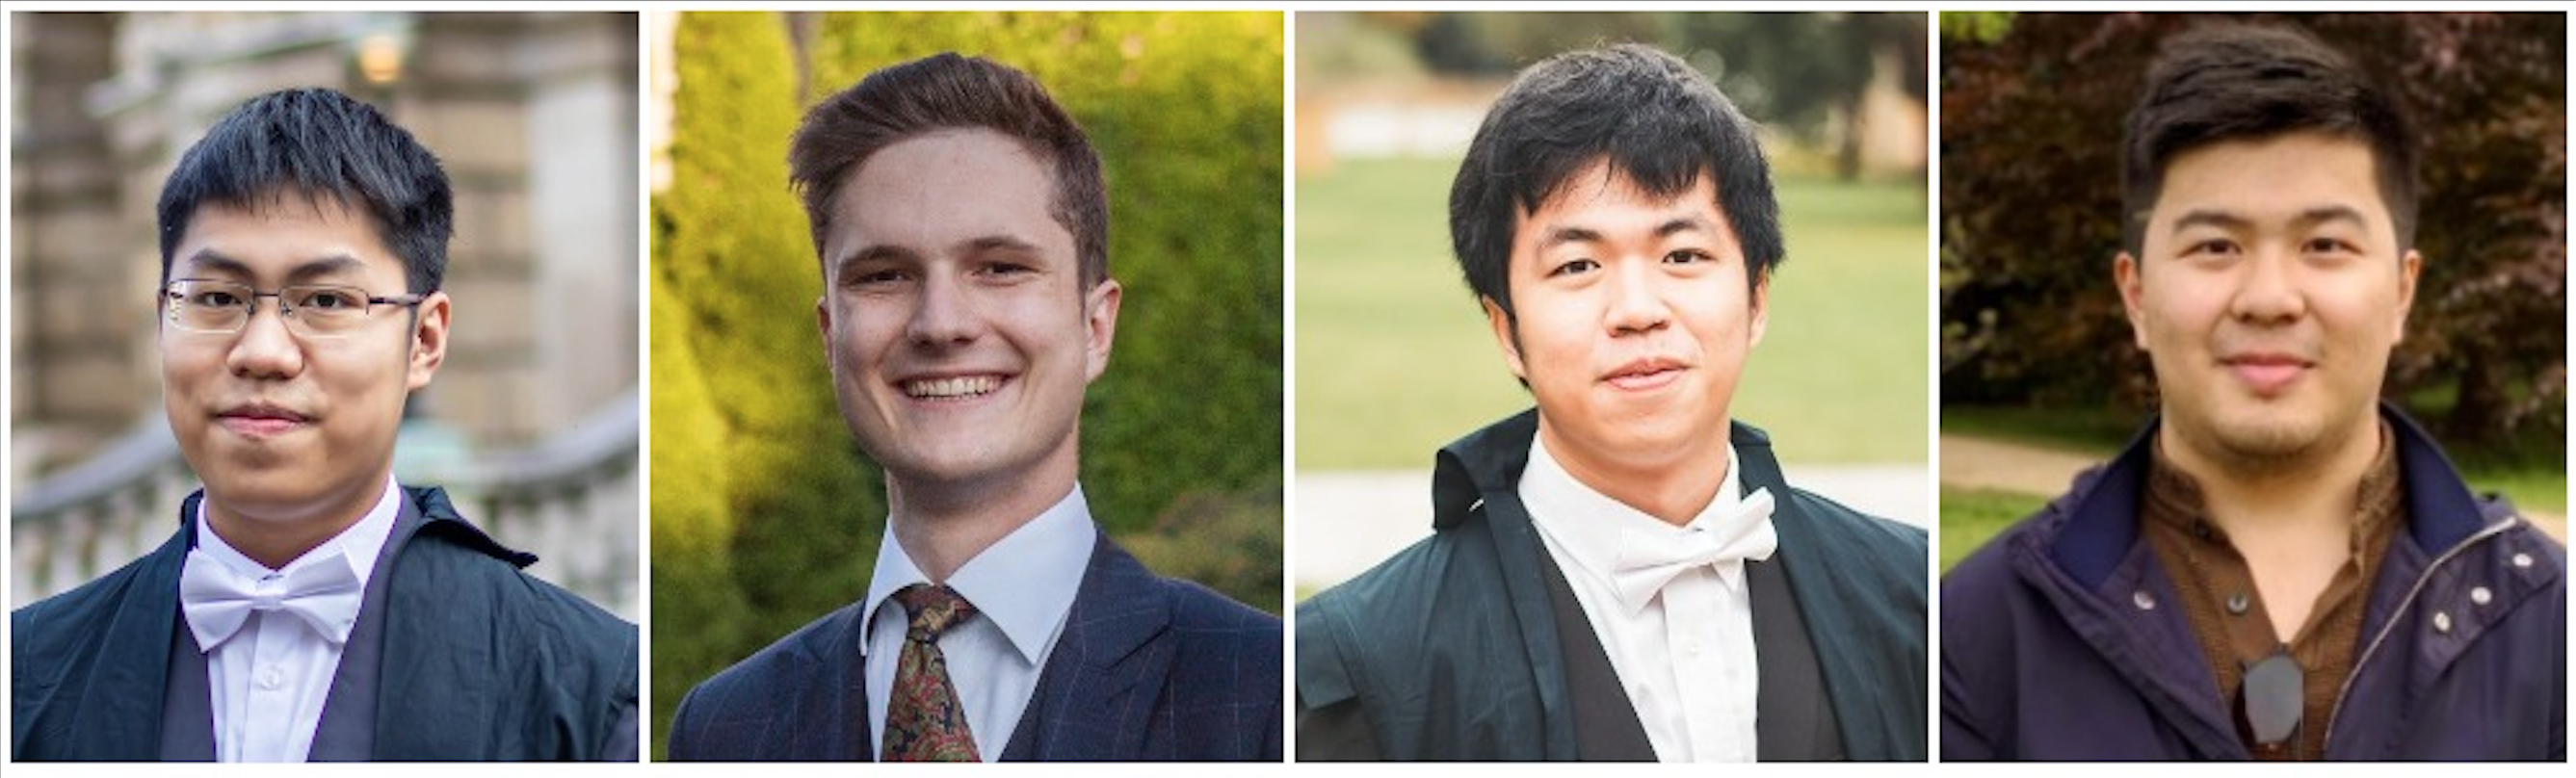 Photos of the four Oxford students who participated in the PAX Moot 2021.